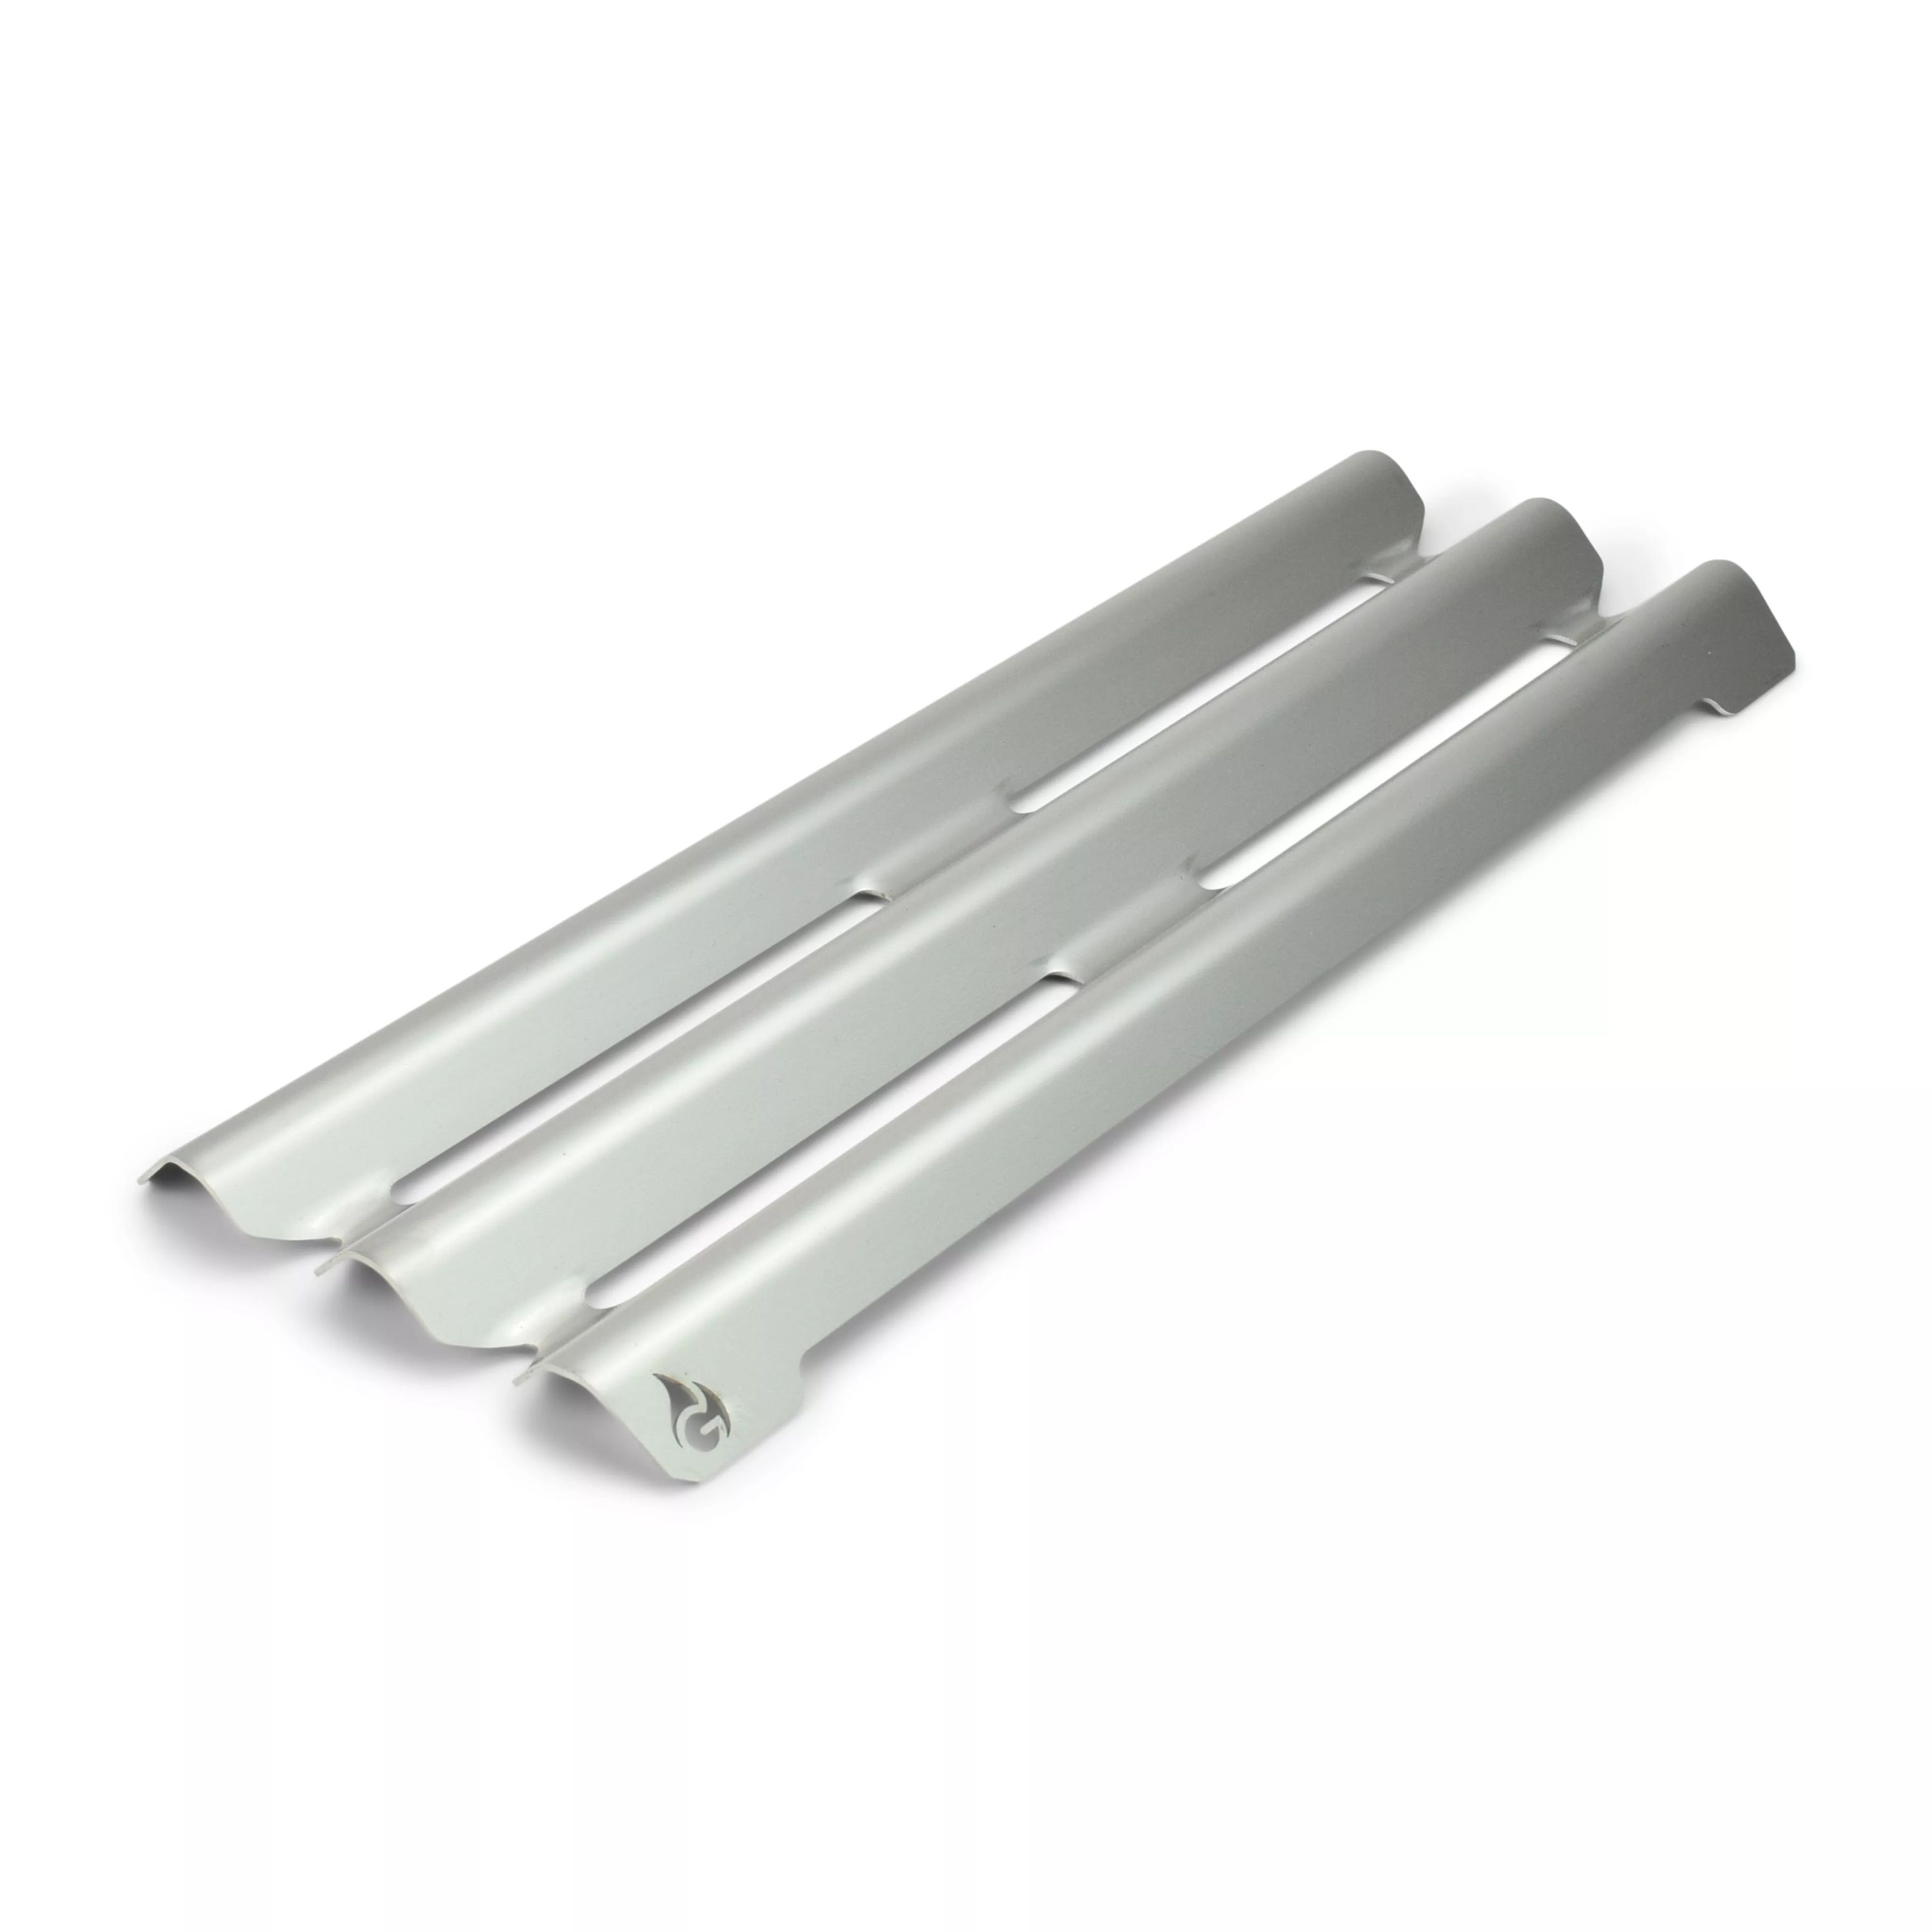 Stainless steel aroma rail for Broil King